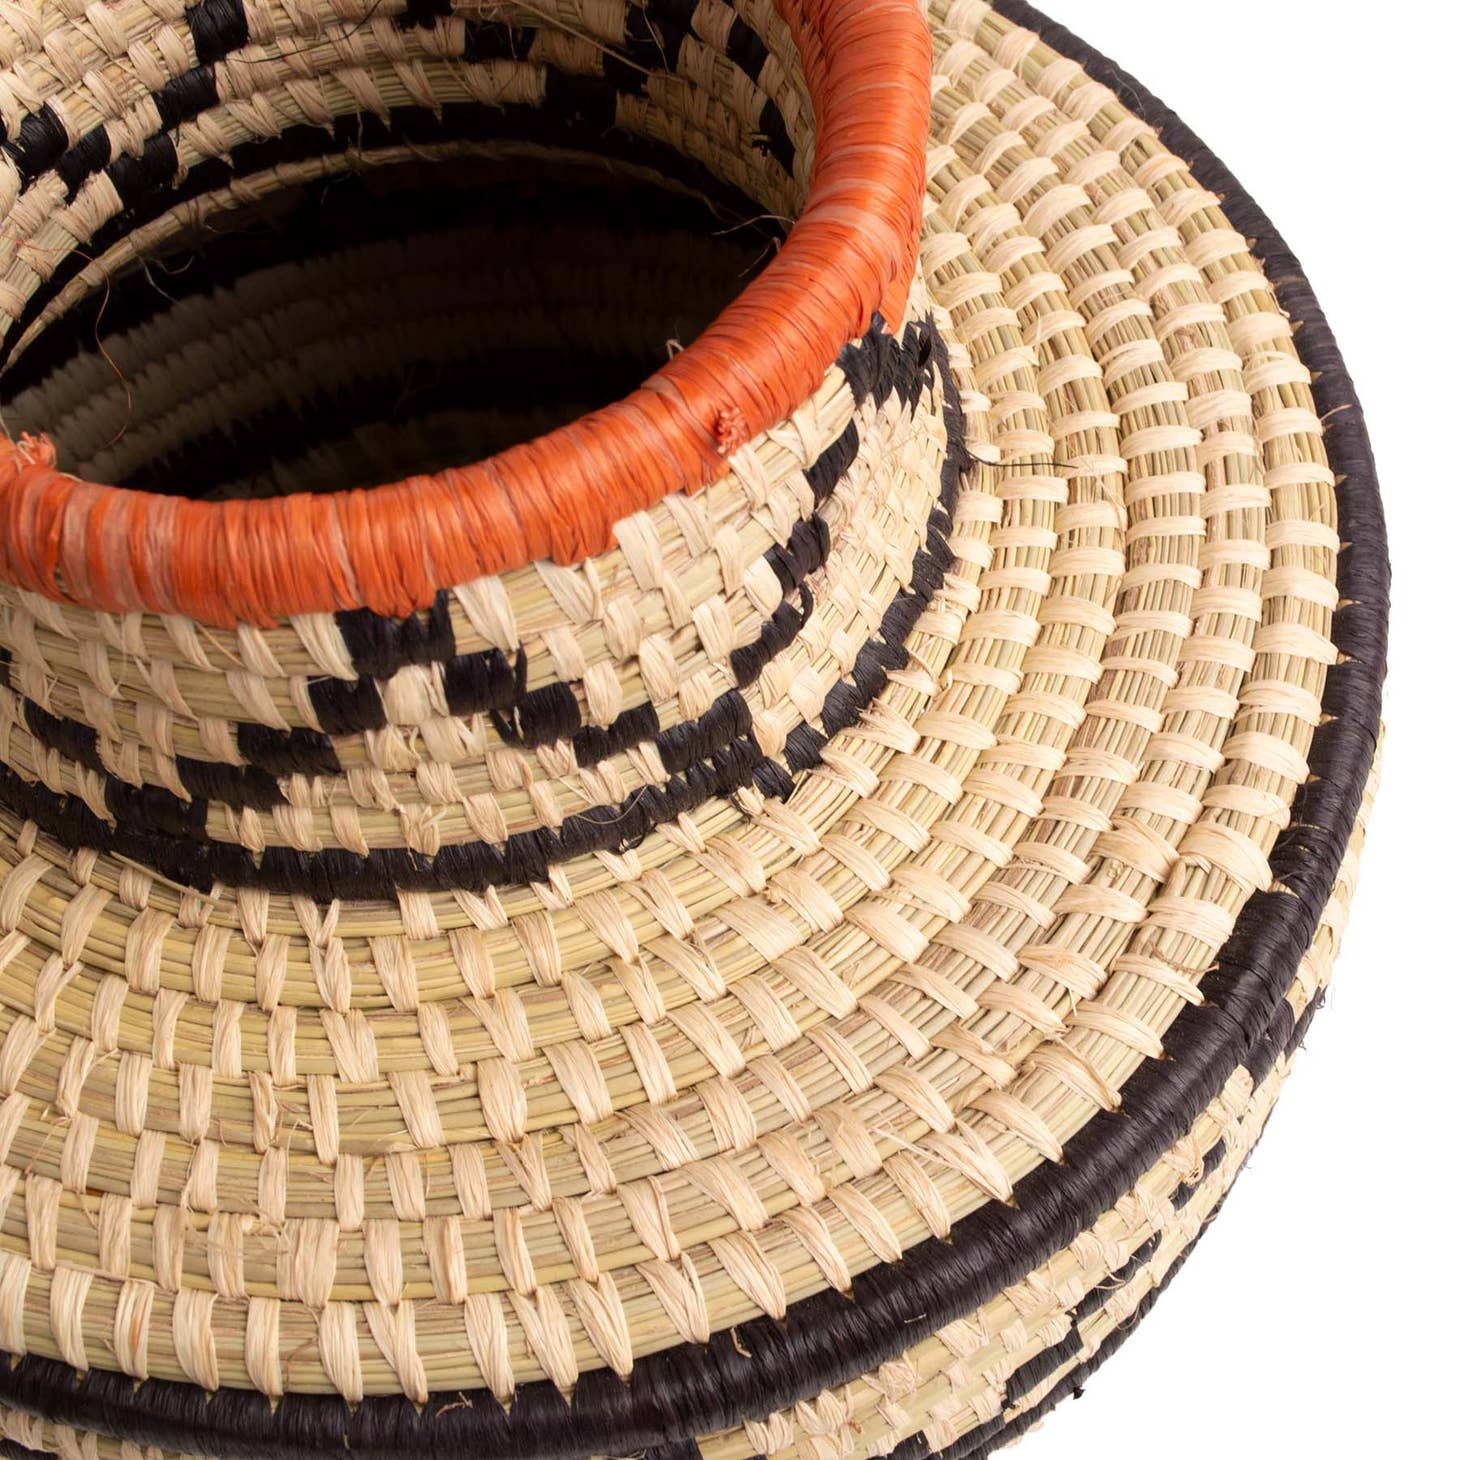 Woven catch all baskets are perfect for just about anything!  Use these stunning home decorations as bathroom storage, organize your bedroom accessories, or use a fruit bowl in the kitchen. Made from all natural fibers of raffia Handmade in Uganda.